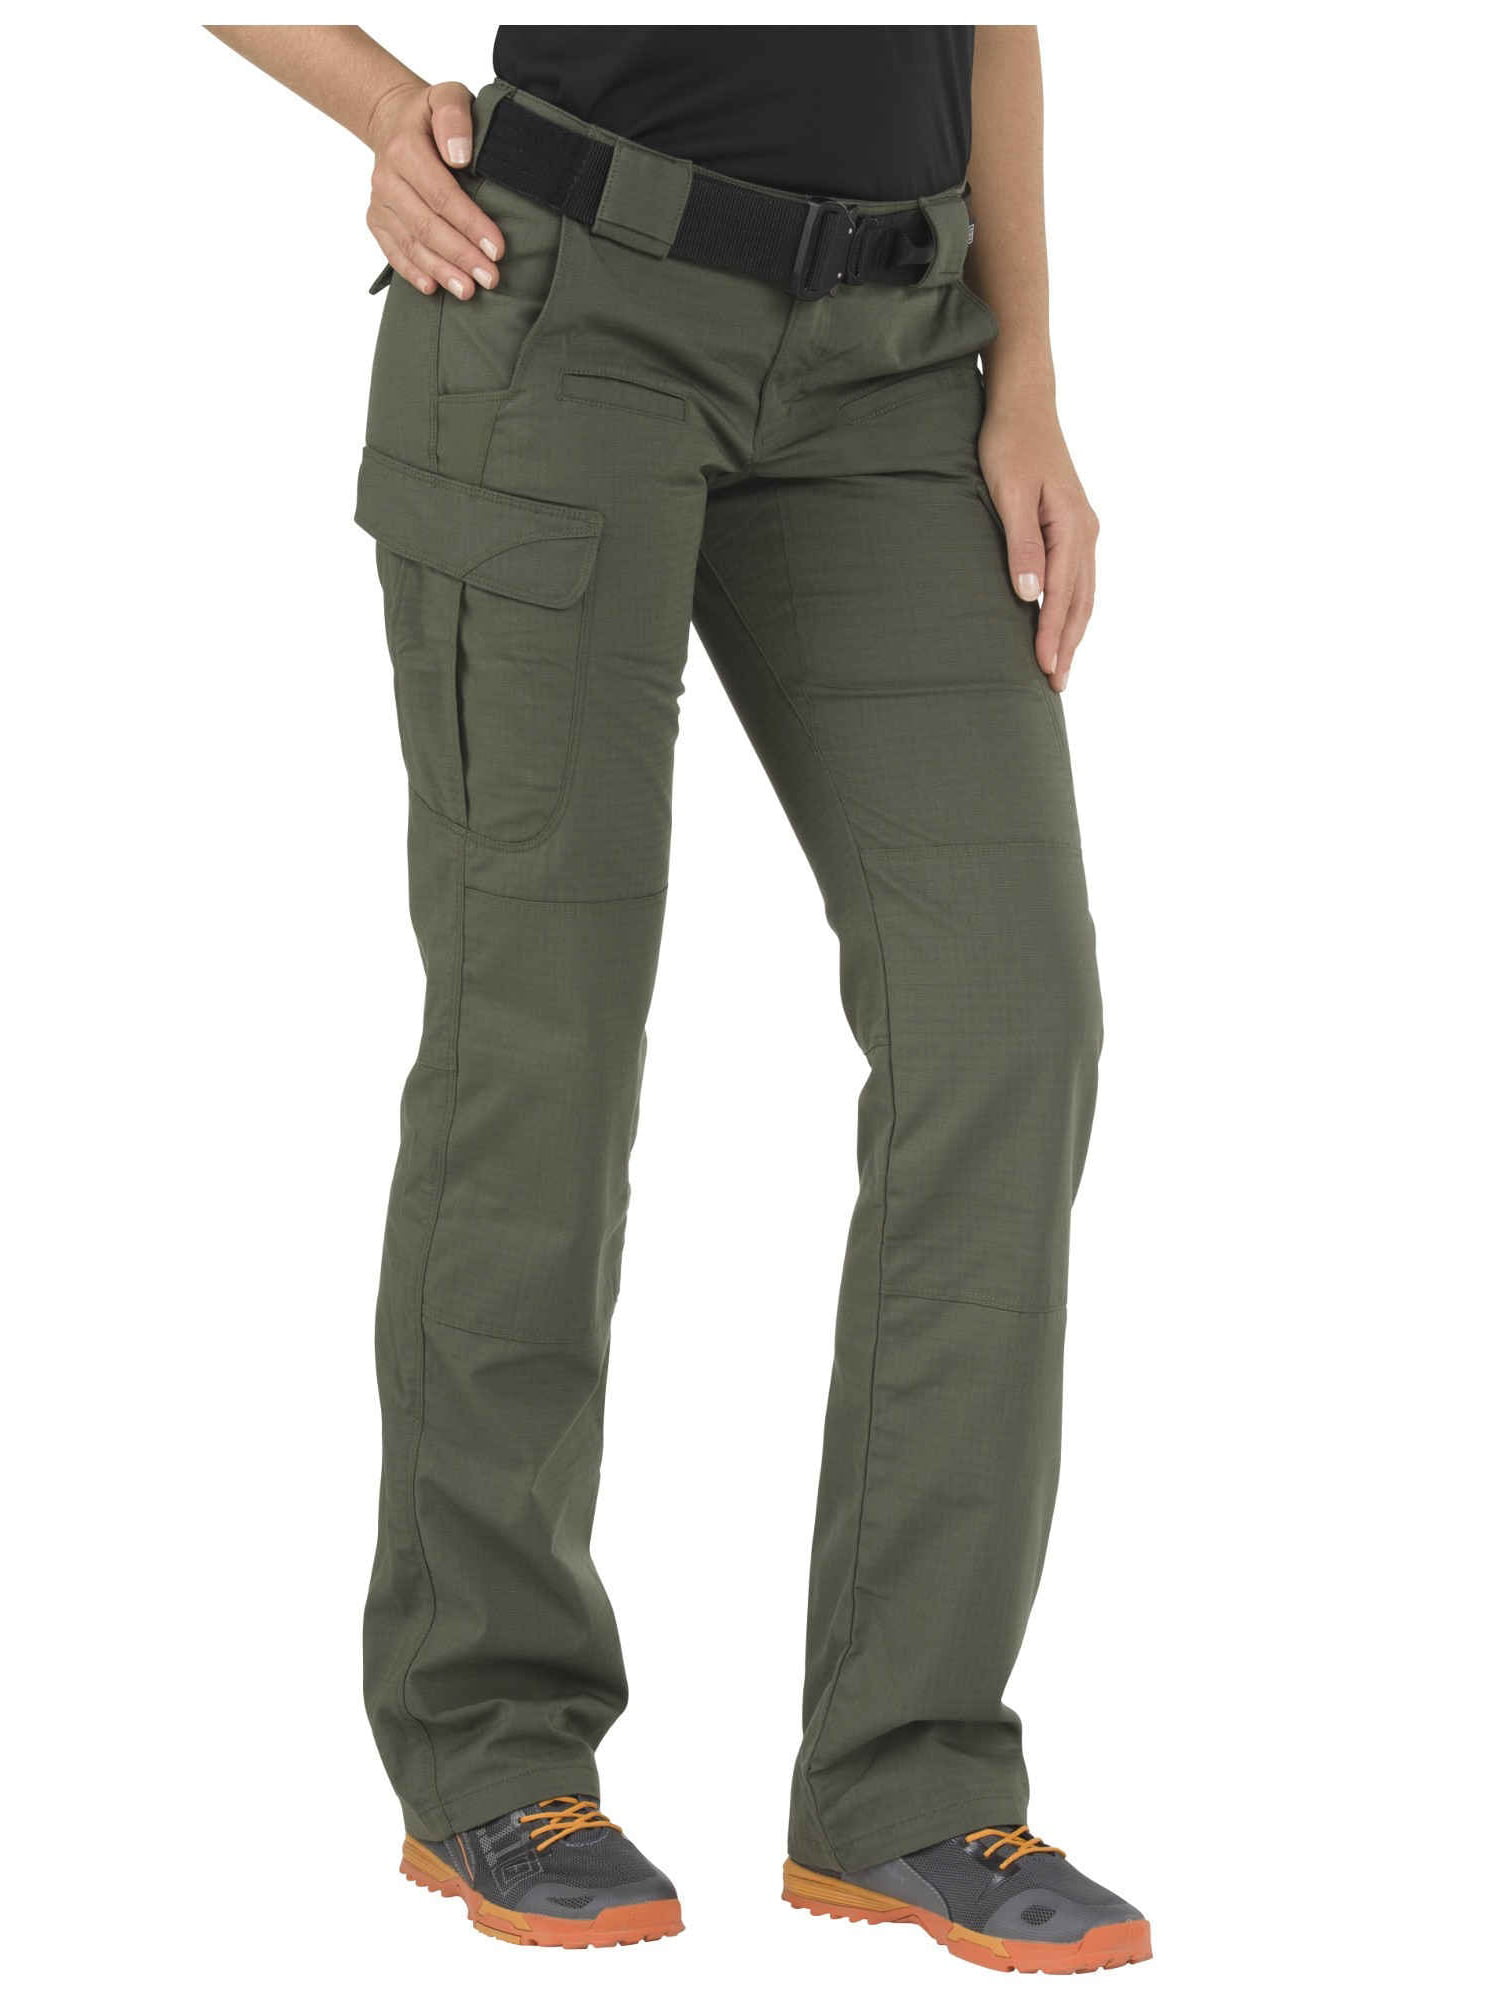 5.11 Tactical Women's Stryke Covert Cargo Pants, Stretchable, Gusseted  Construction, TDU Green, 10/Long, Style 64386 - Walmart.com